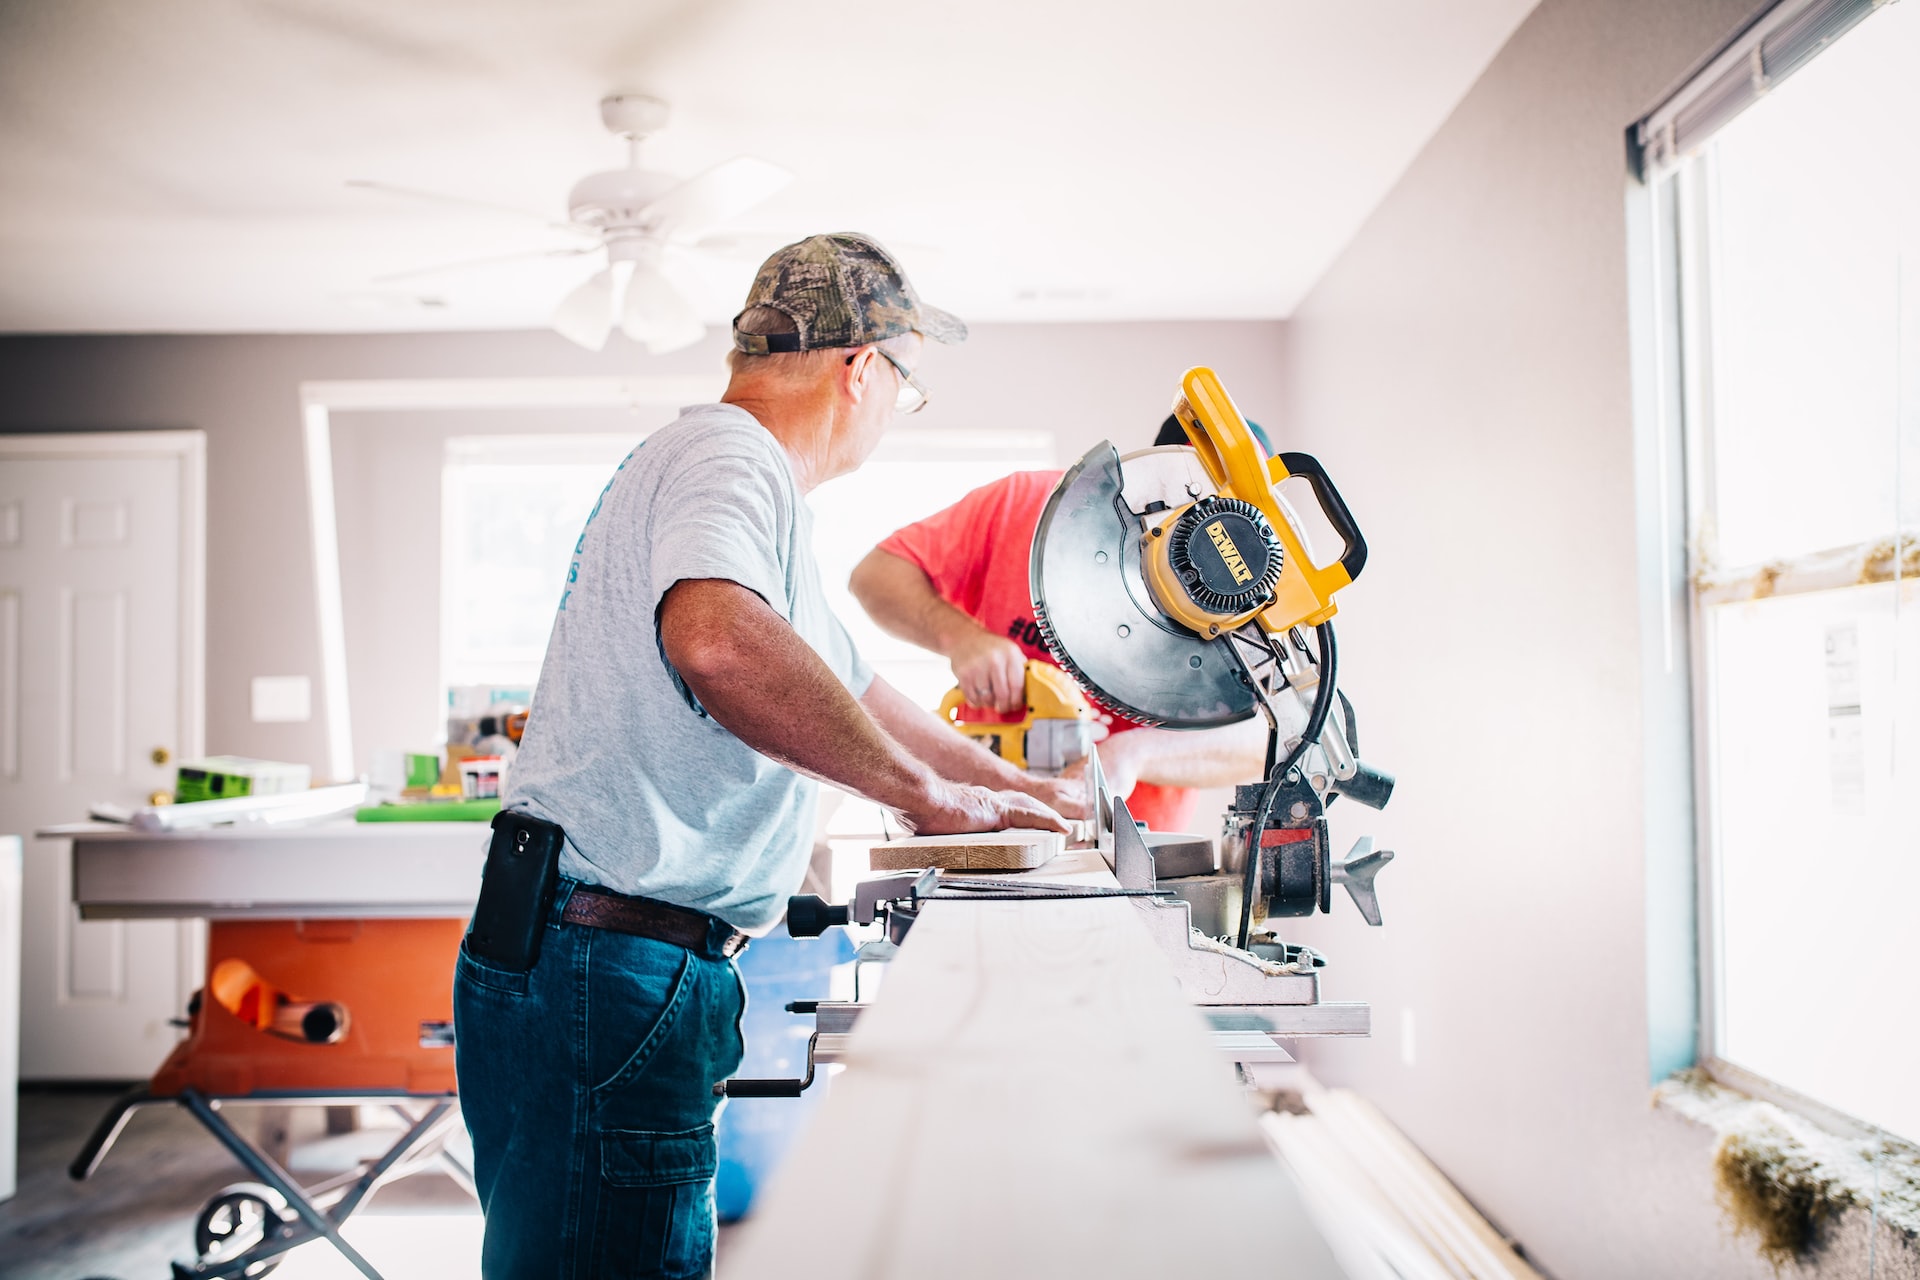 10 Things to Keep in Mind When Choosing a Temporary Housing Situation for Your Renovation